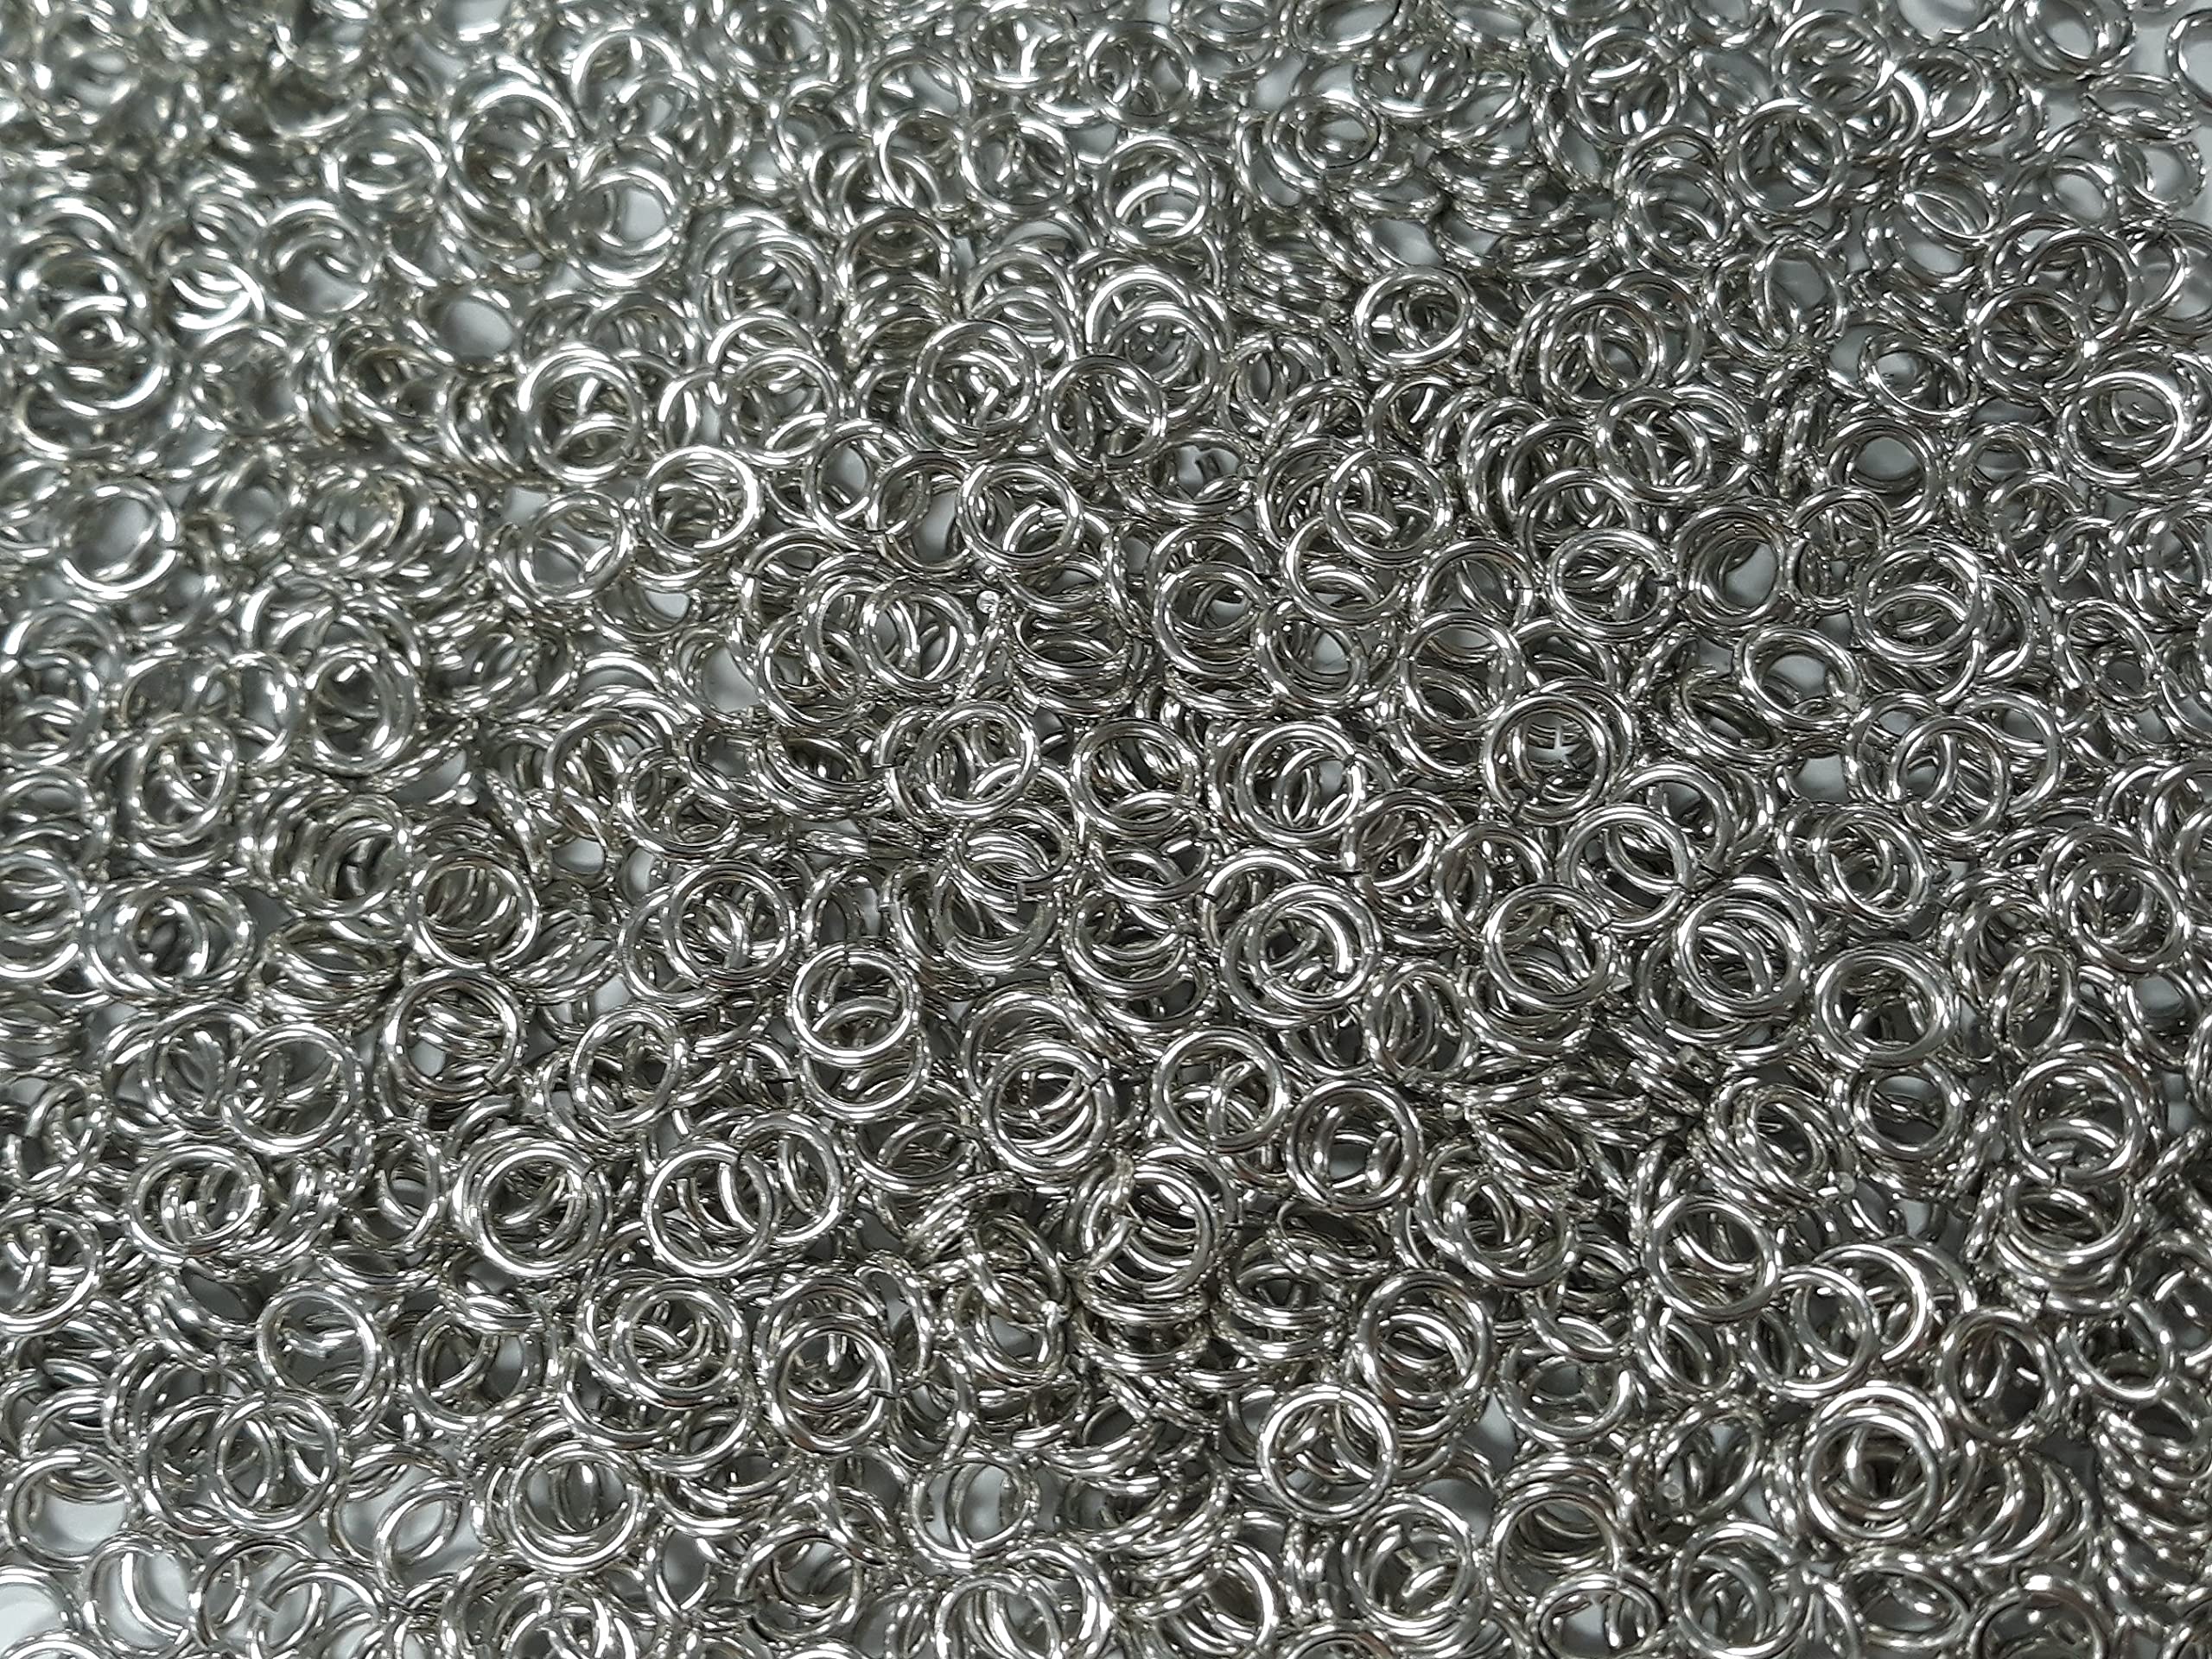 Chainmail Joe 1 Pound Bright Aluminum chainmail Jump Rings 16g 14 ID (3600  Rings)